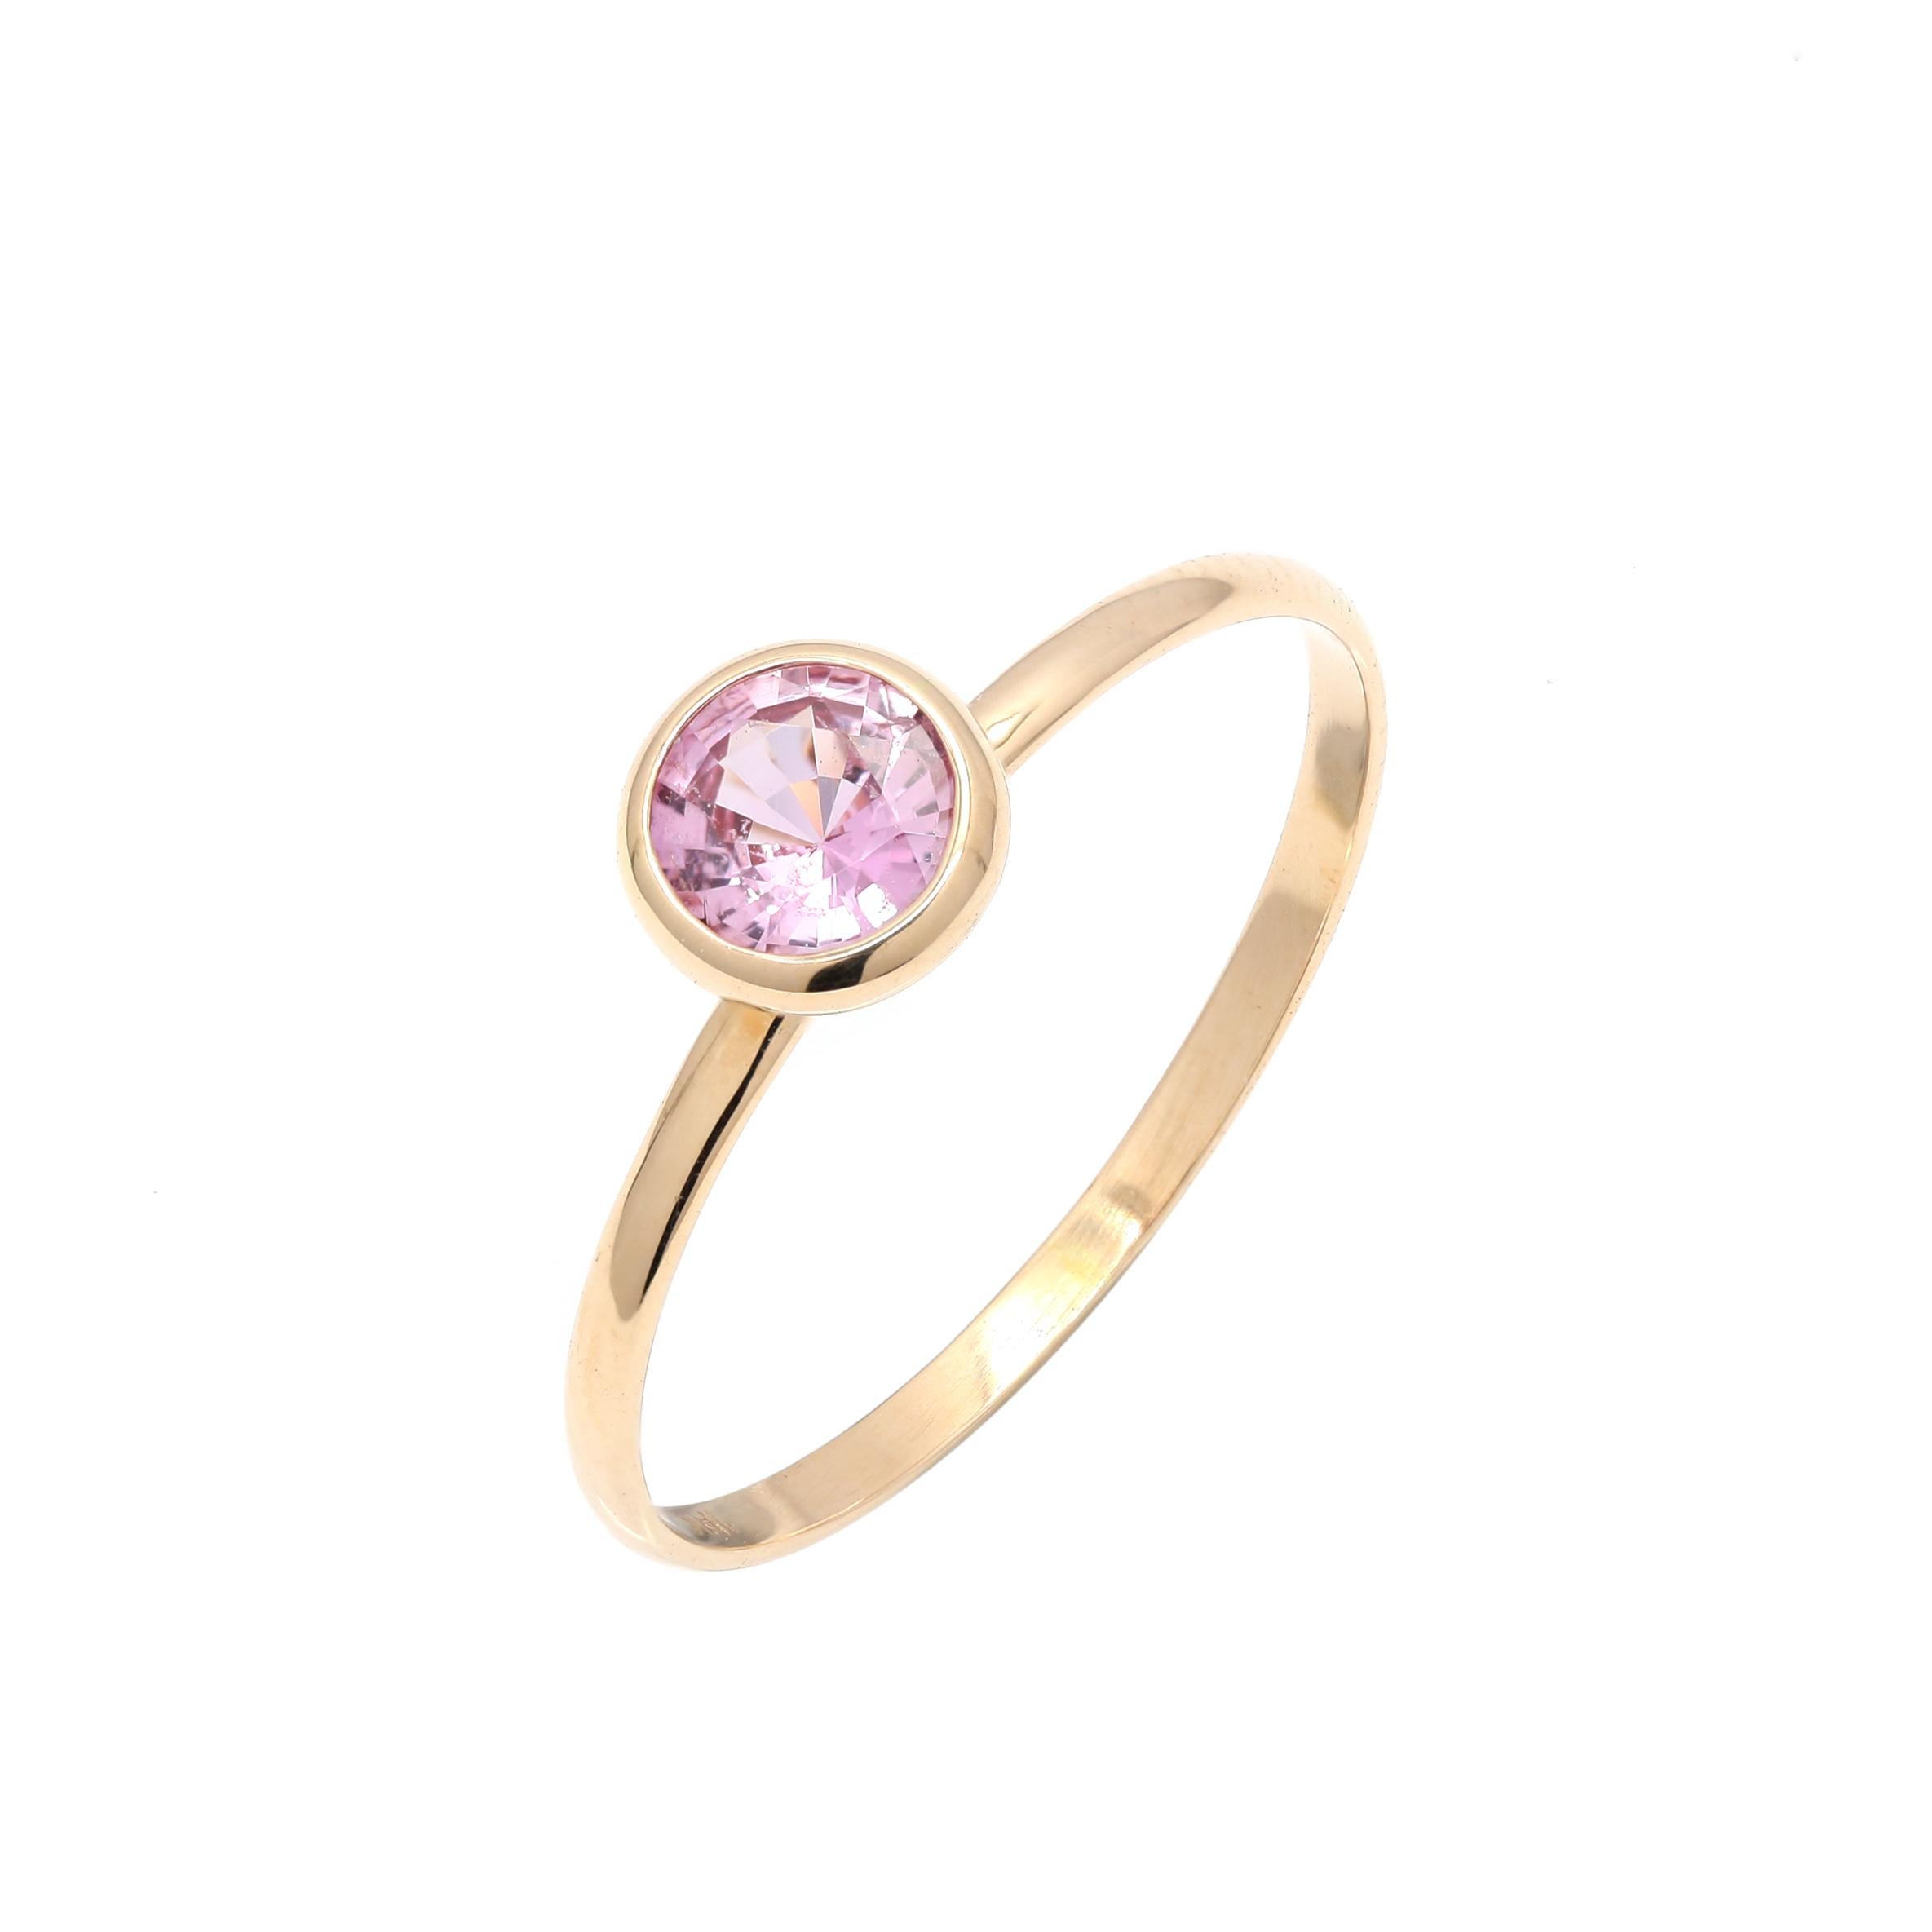 For Sale:  Solid 18k Yellow Gold Genuine Pink Sapphire Ring, Dainty Sapphire Ring for Her 2